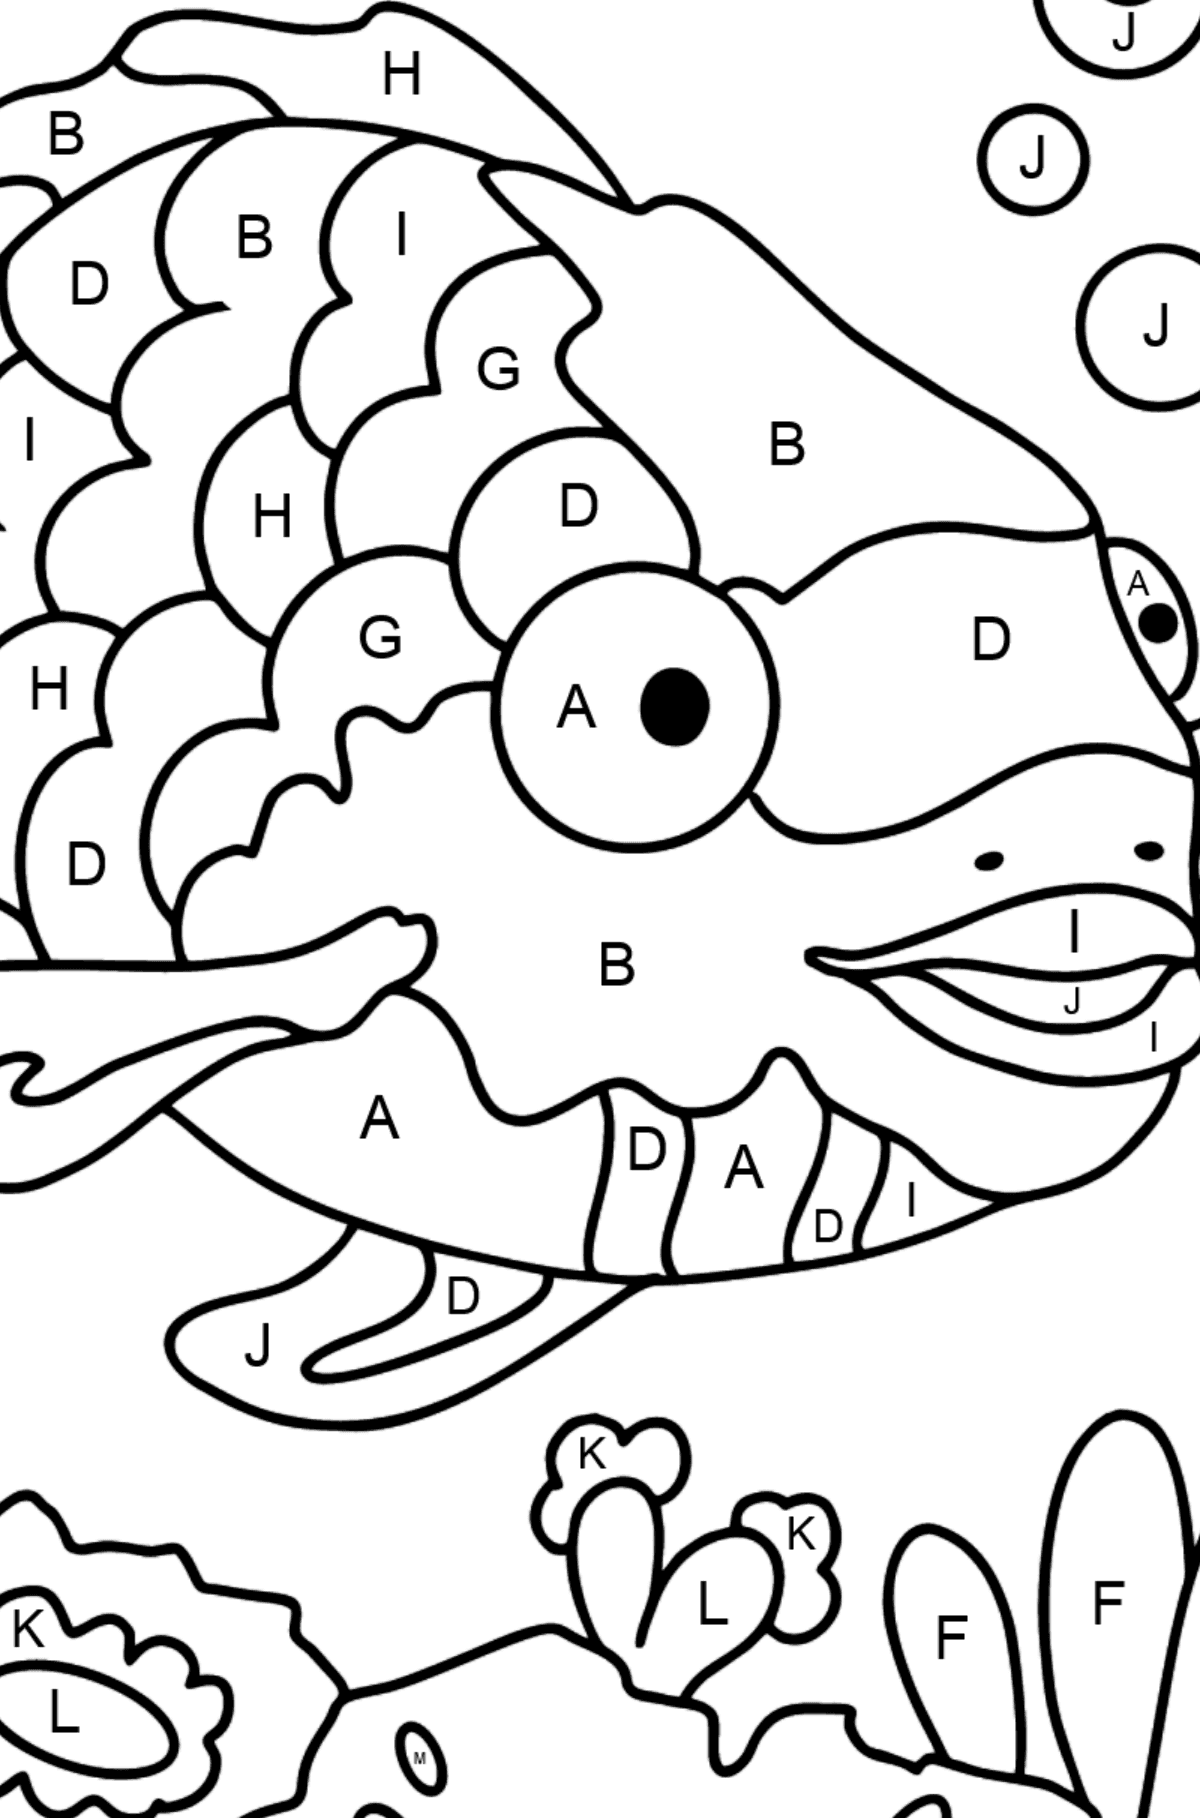 Coloring Page - An Exotic or Rainbow fish - Coloring by Letters for Kids